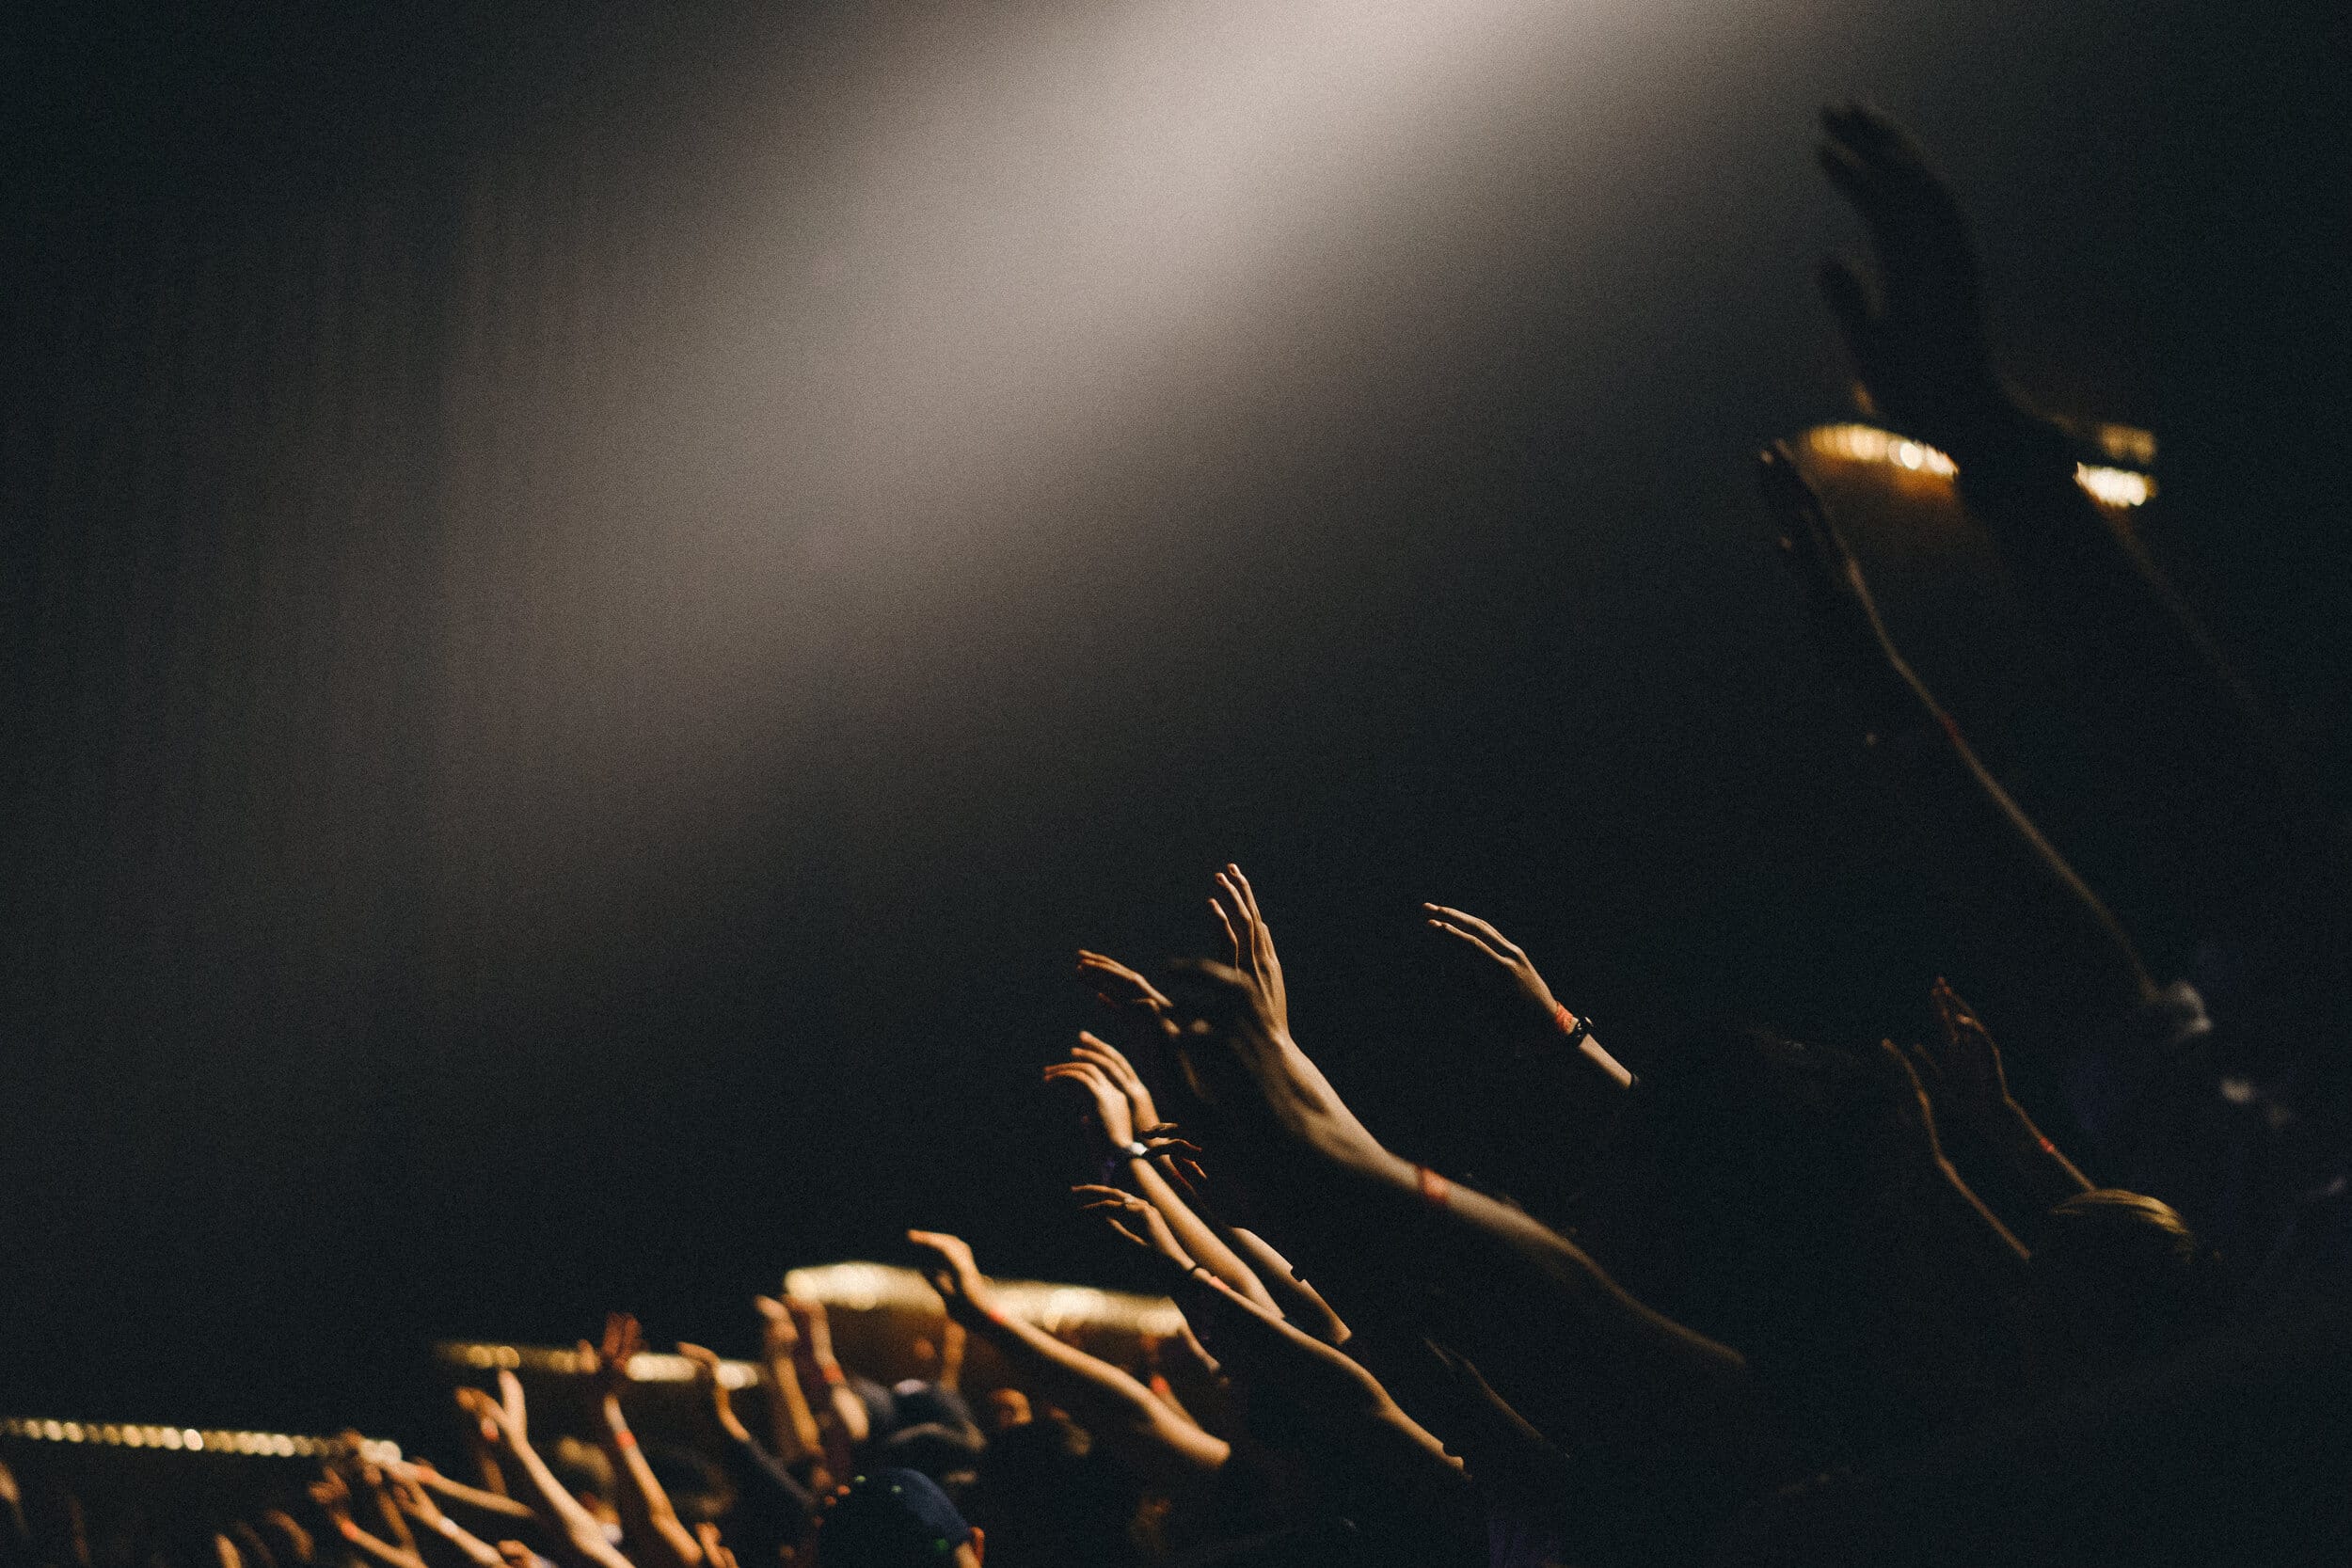 Student worship may look different this year, but it is an important part of the North Greenville experience. (Photo courtesy of Unsplash)